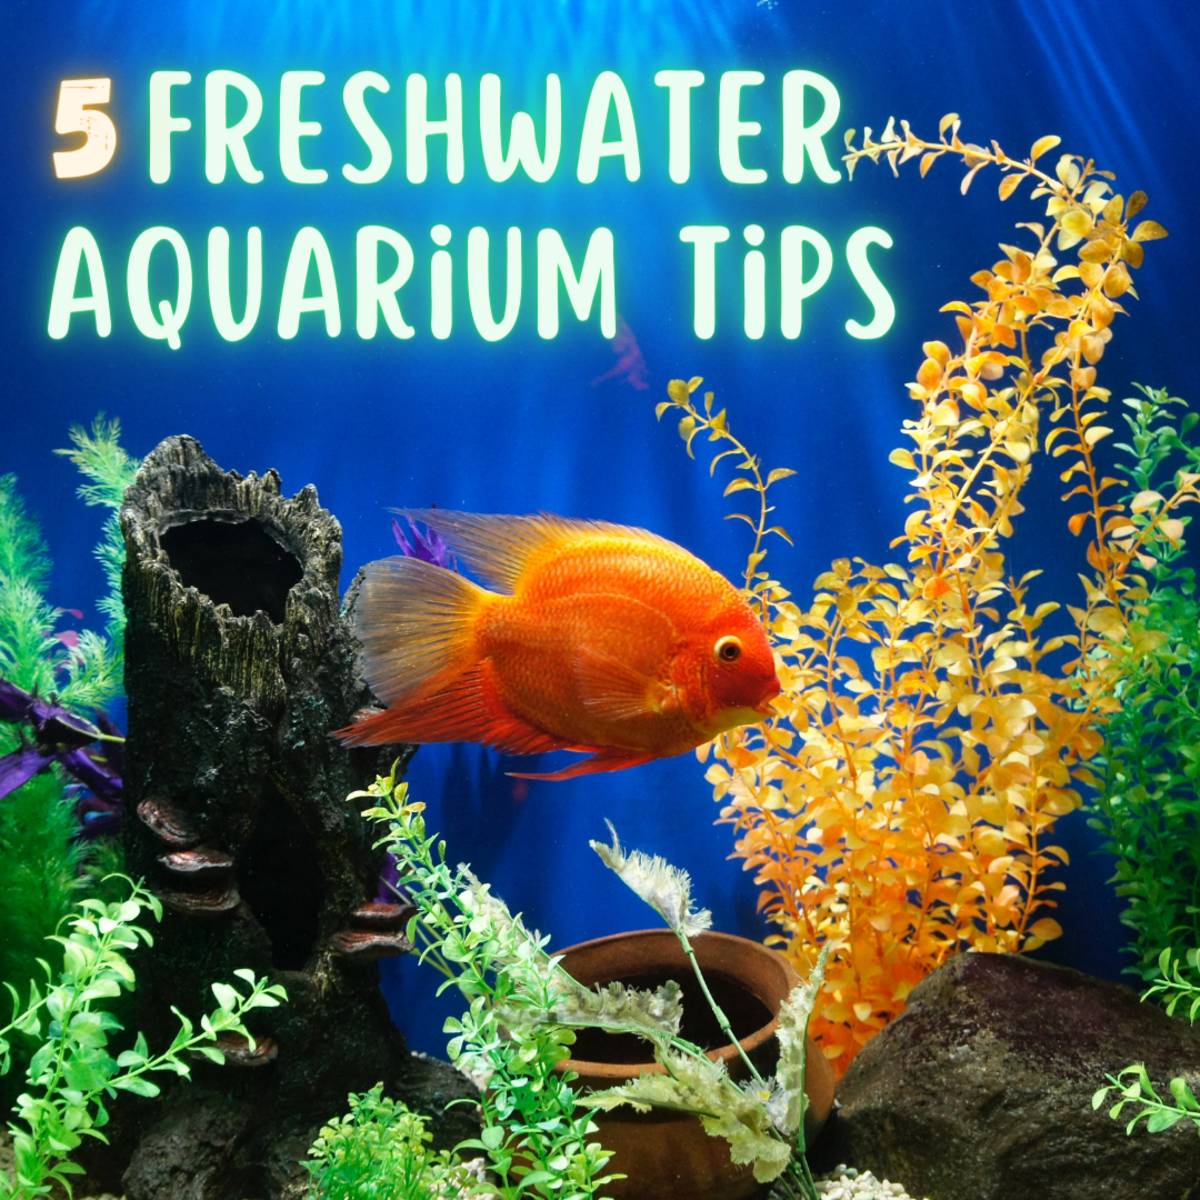 These tips for starting a freshwater aquarium will get your new tank on the road to success!